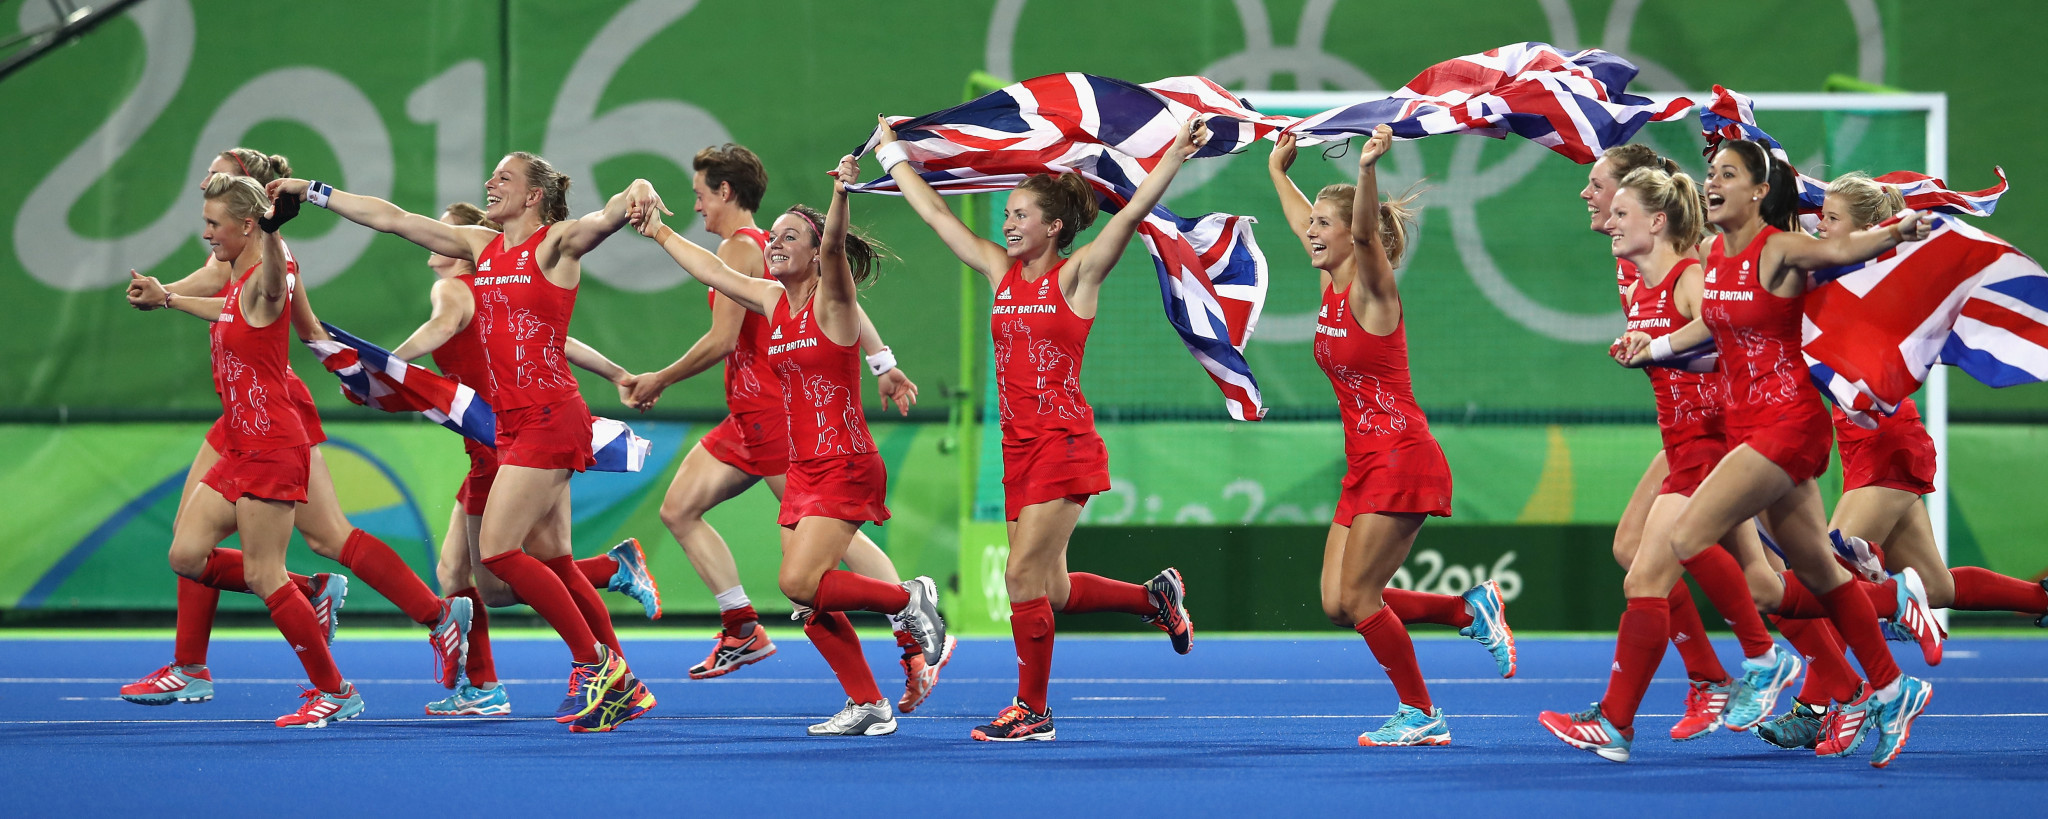 The women's hockey team celebrate winning one of Britain's 27 Olympic gold medals at Rio 2016 ©Getty Images